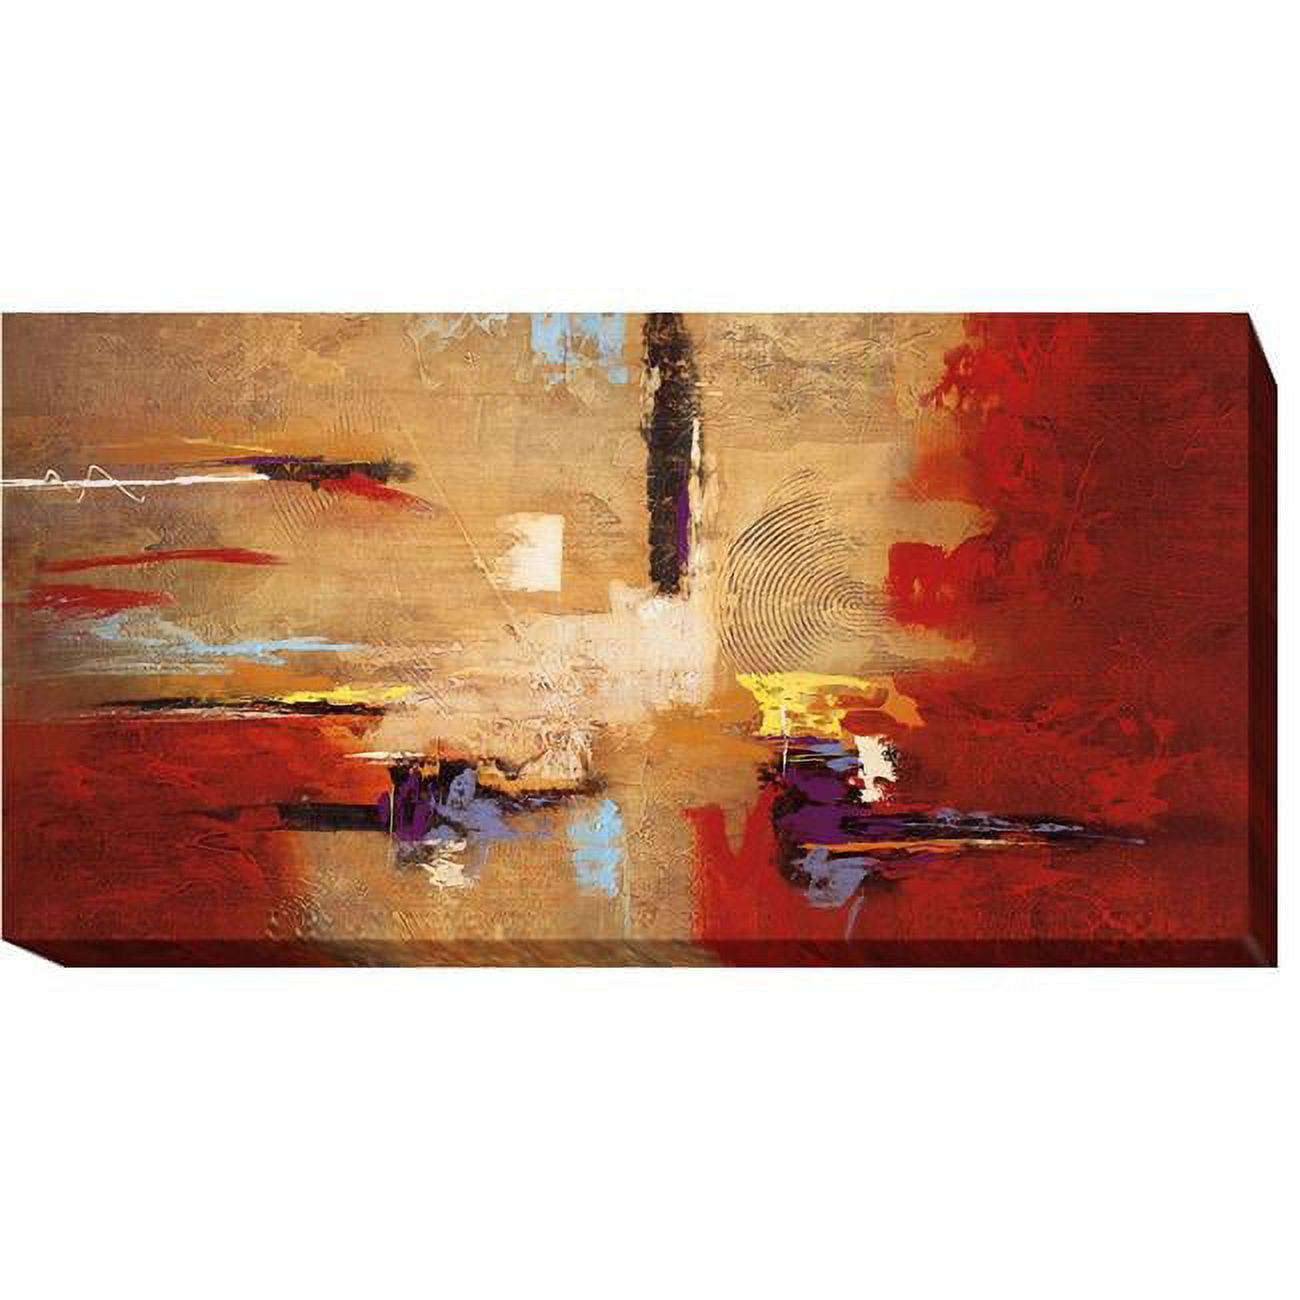 1224509cg Montage By Nancy Santos Premium Gallery Wrapped Canvas Giclee Art - Ready-to-hang, 12 X 24 X 1.5 In.